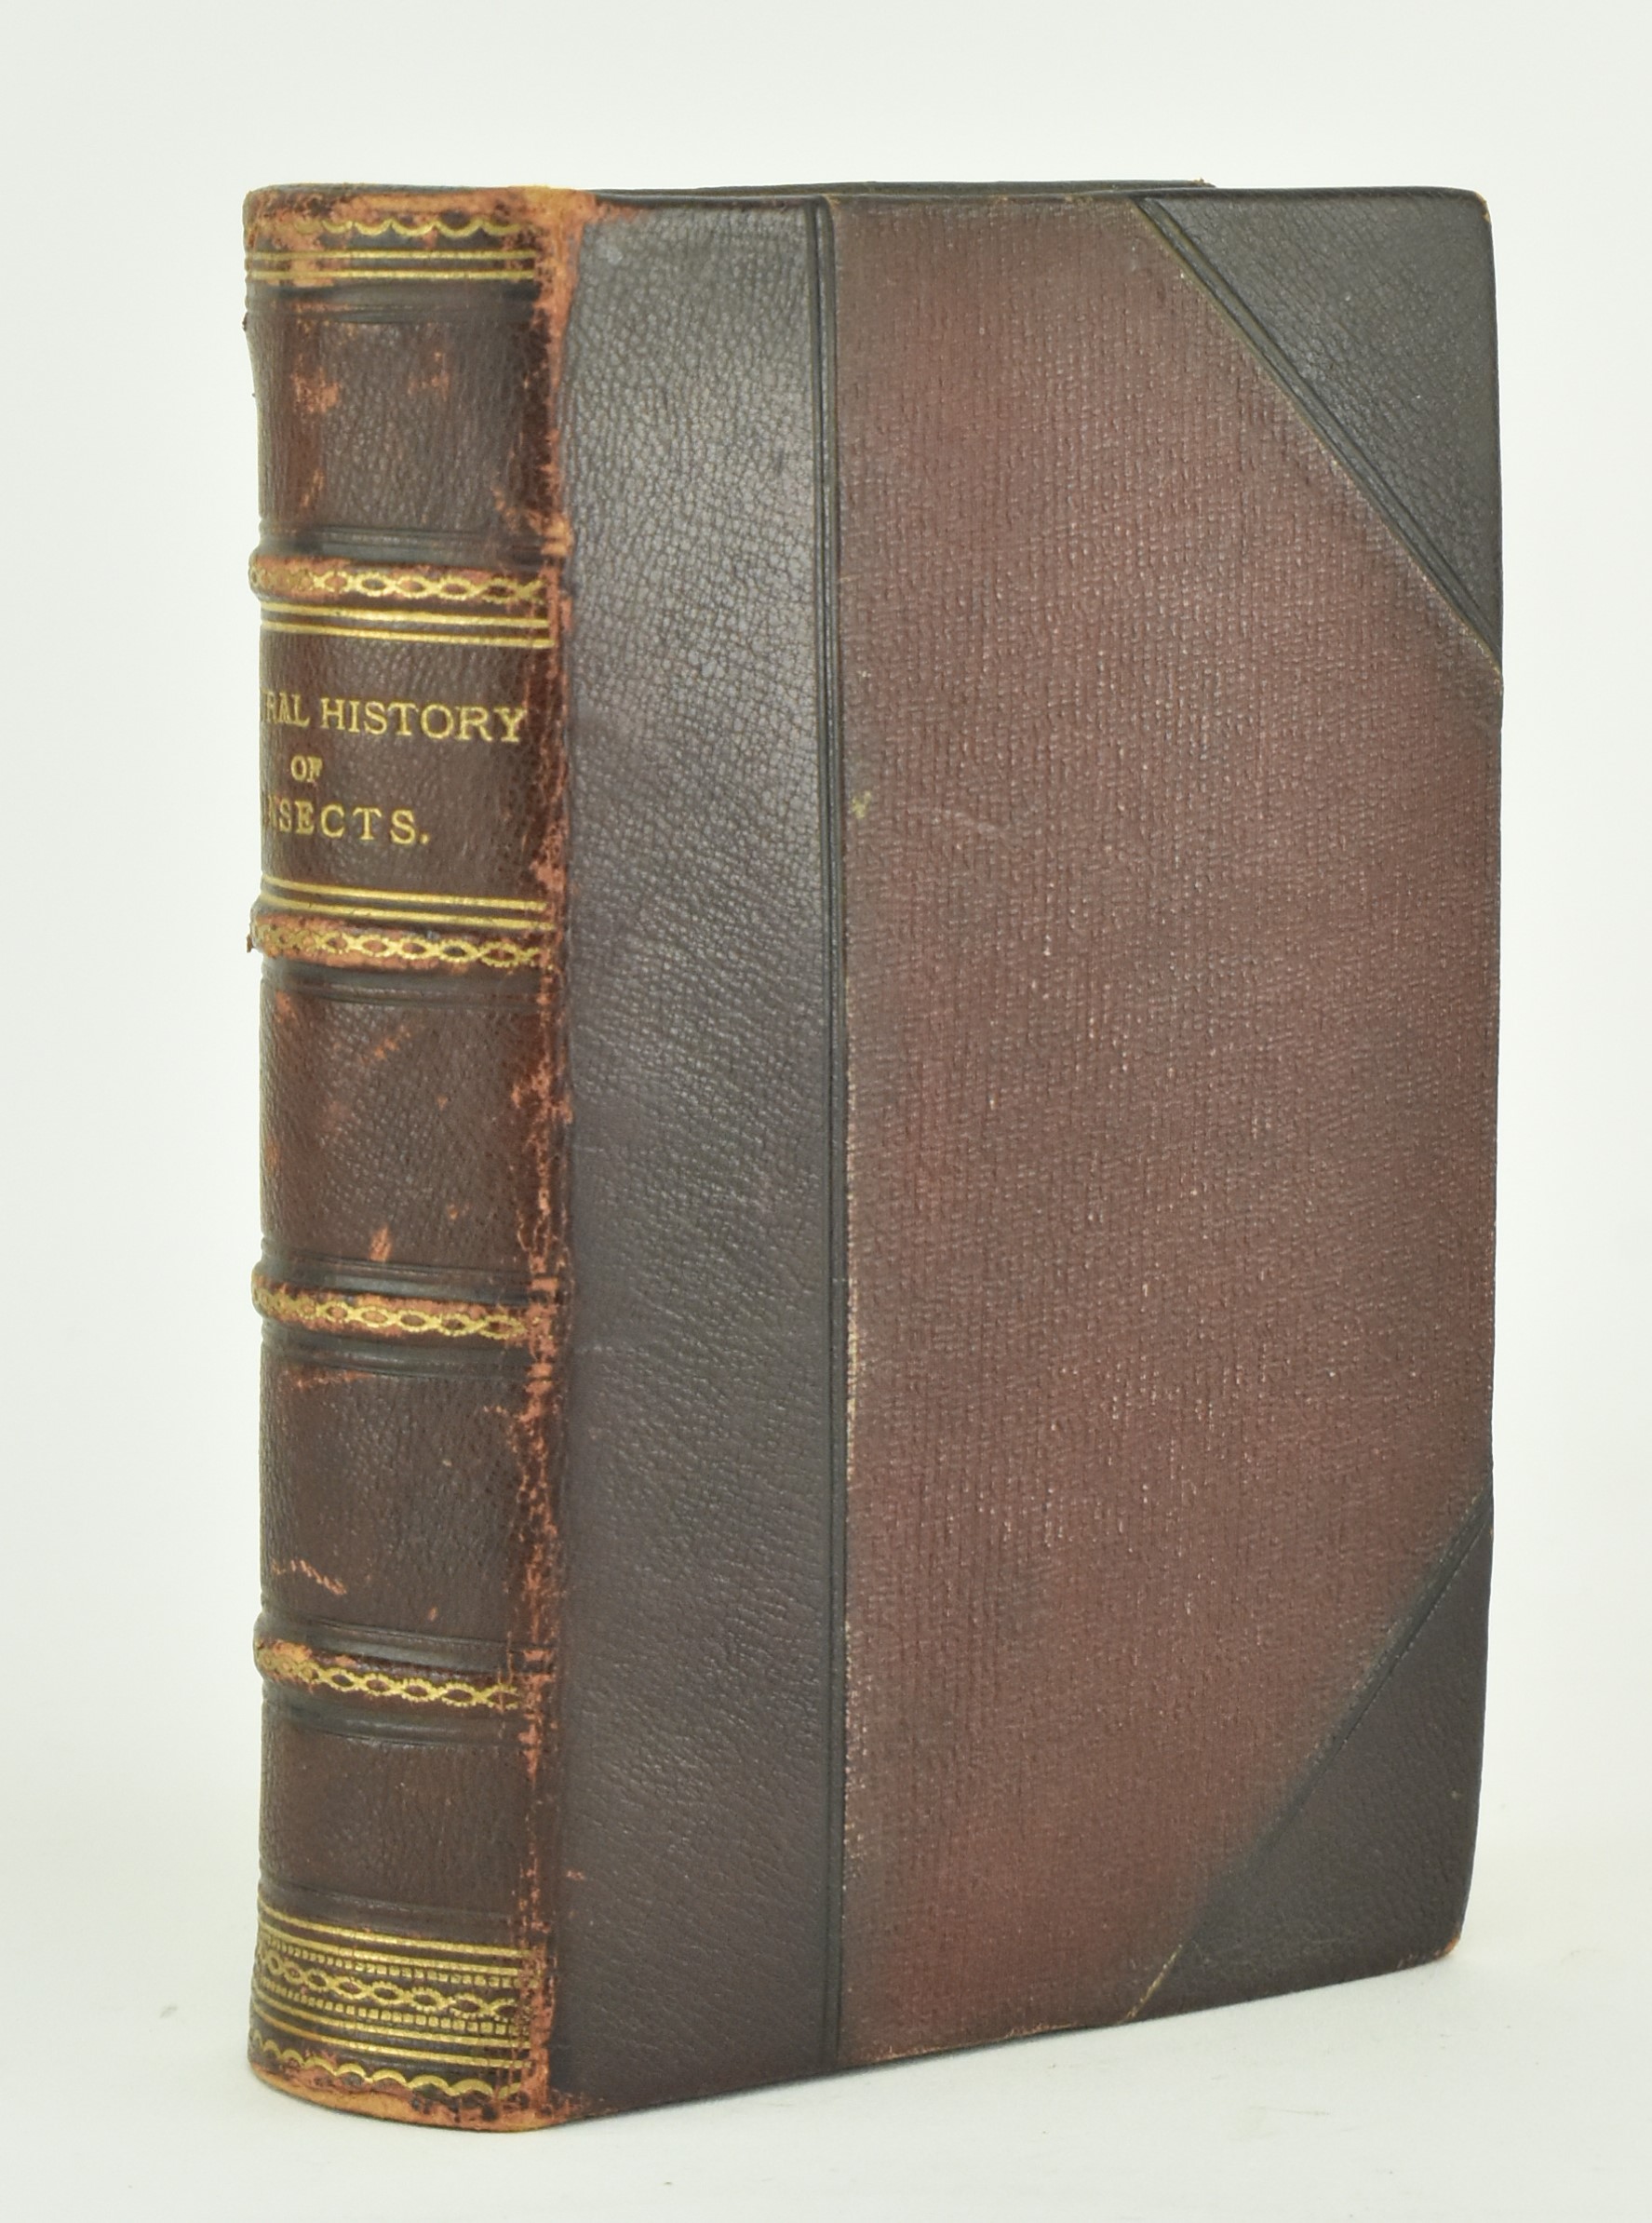 1829 THE NATURAL HISTORY OF INSECTS, TWO VOLUMES IN ONE